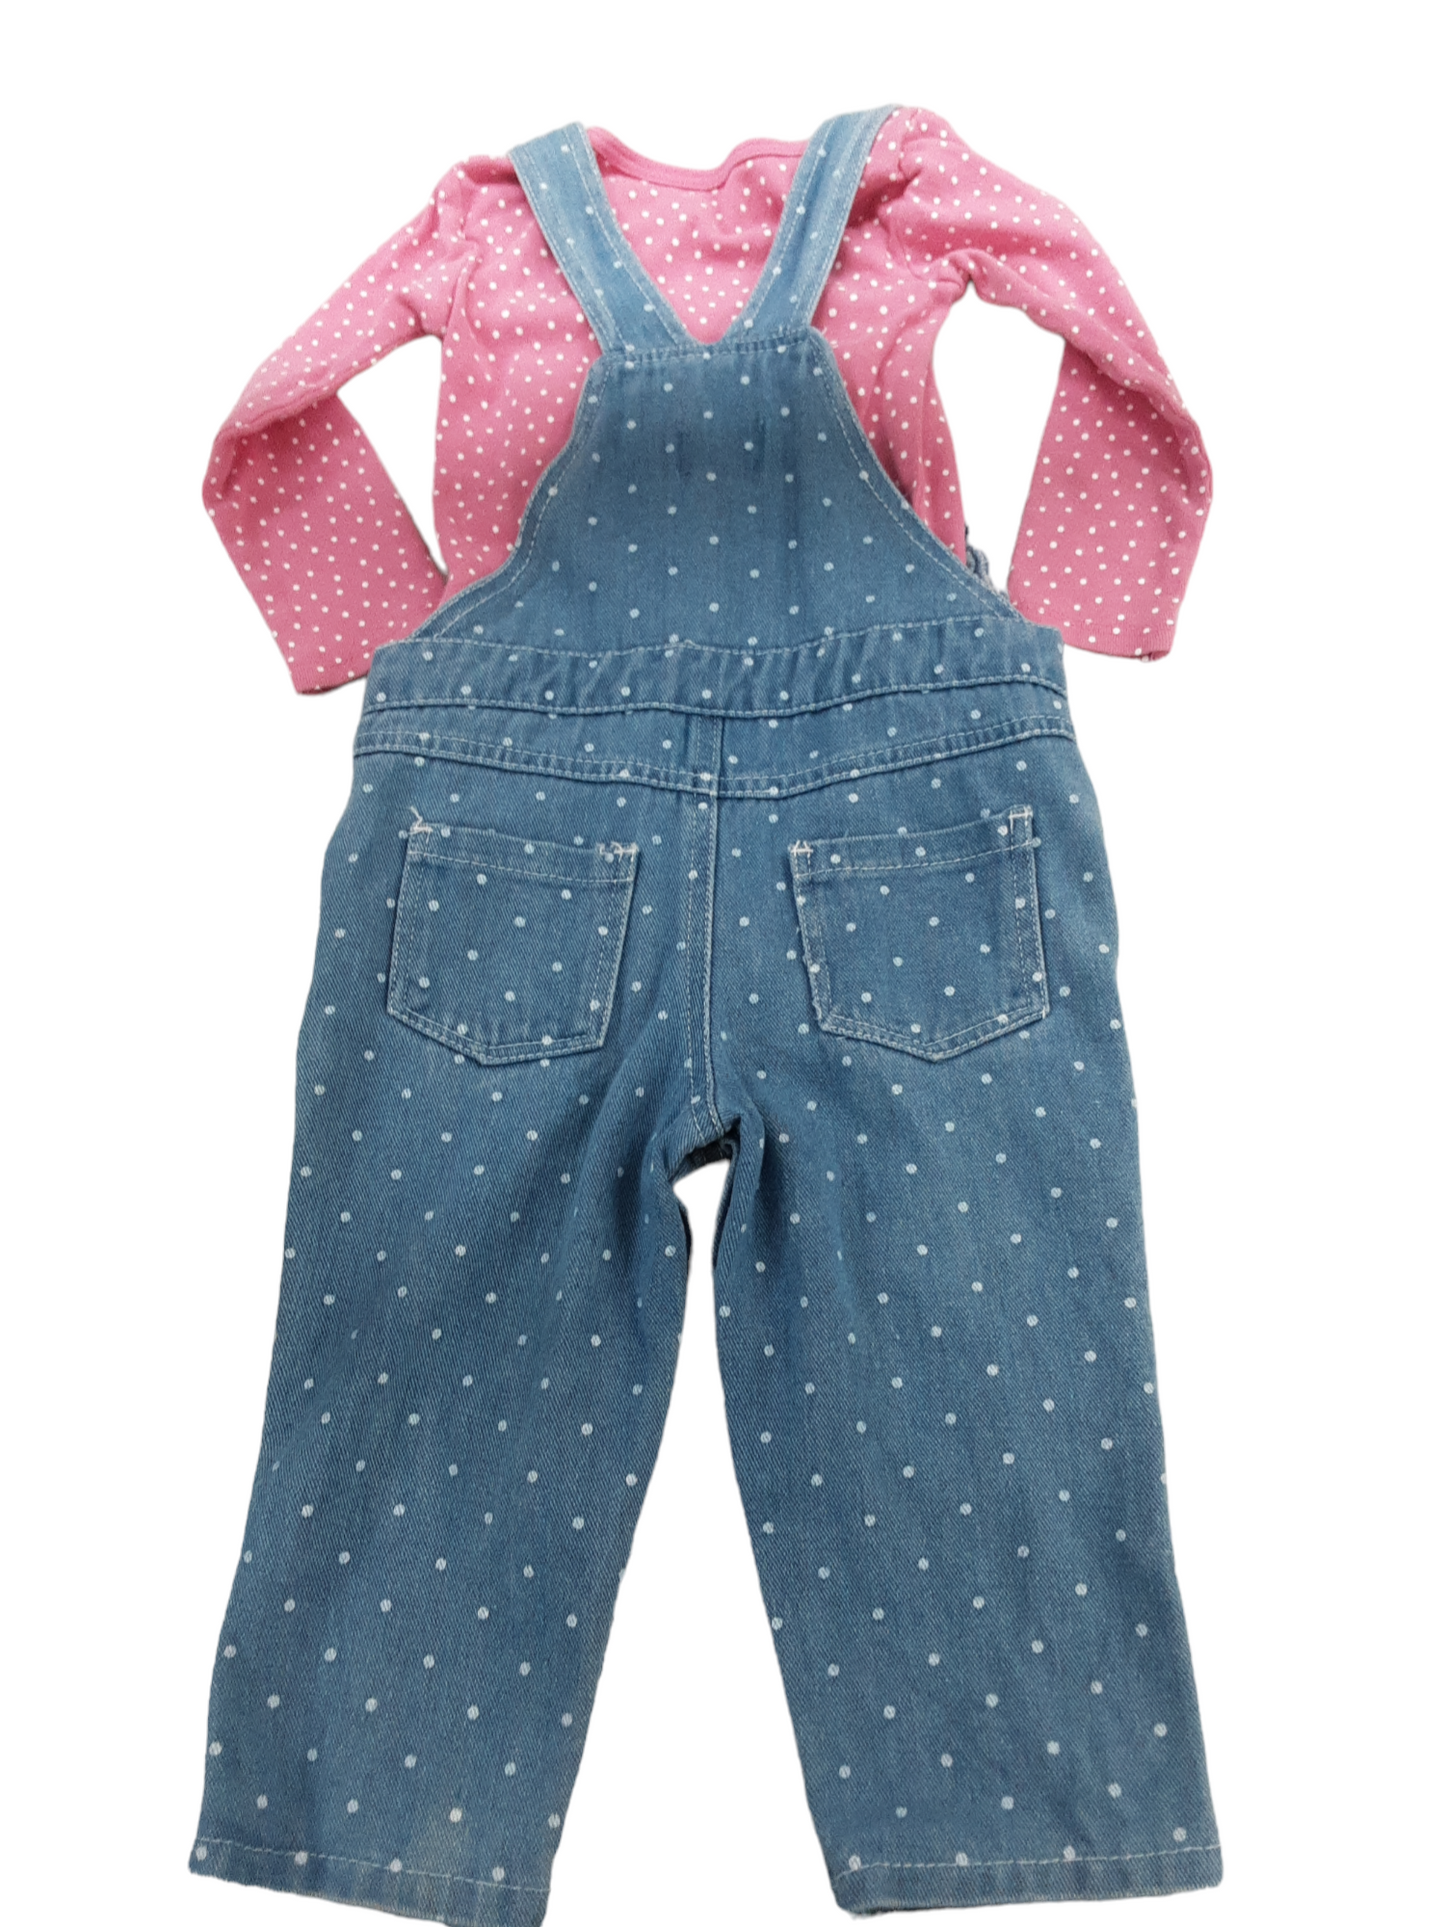 Polka-dot denim  overalls paired with pink polka-dot onsie size 18-24months